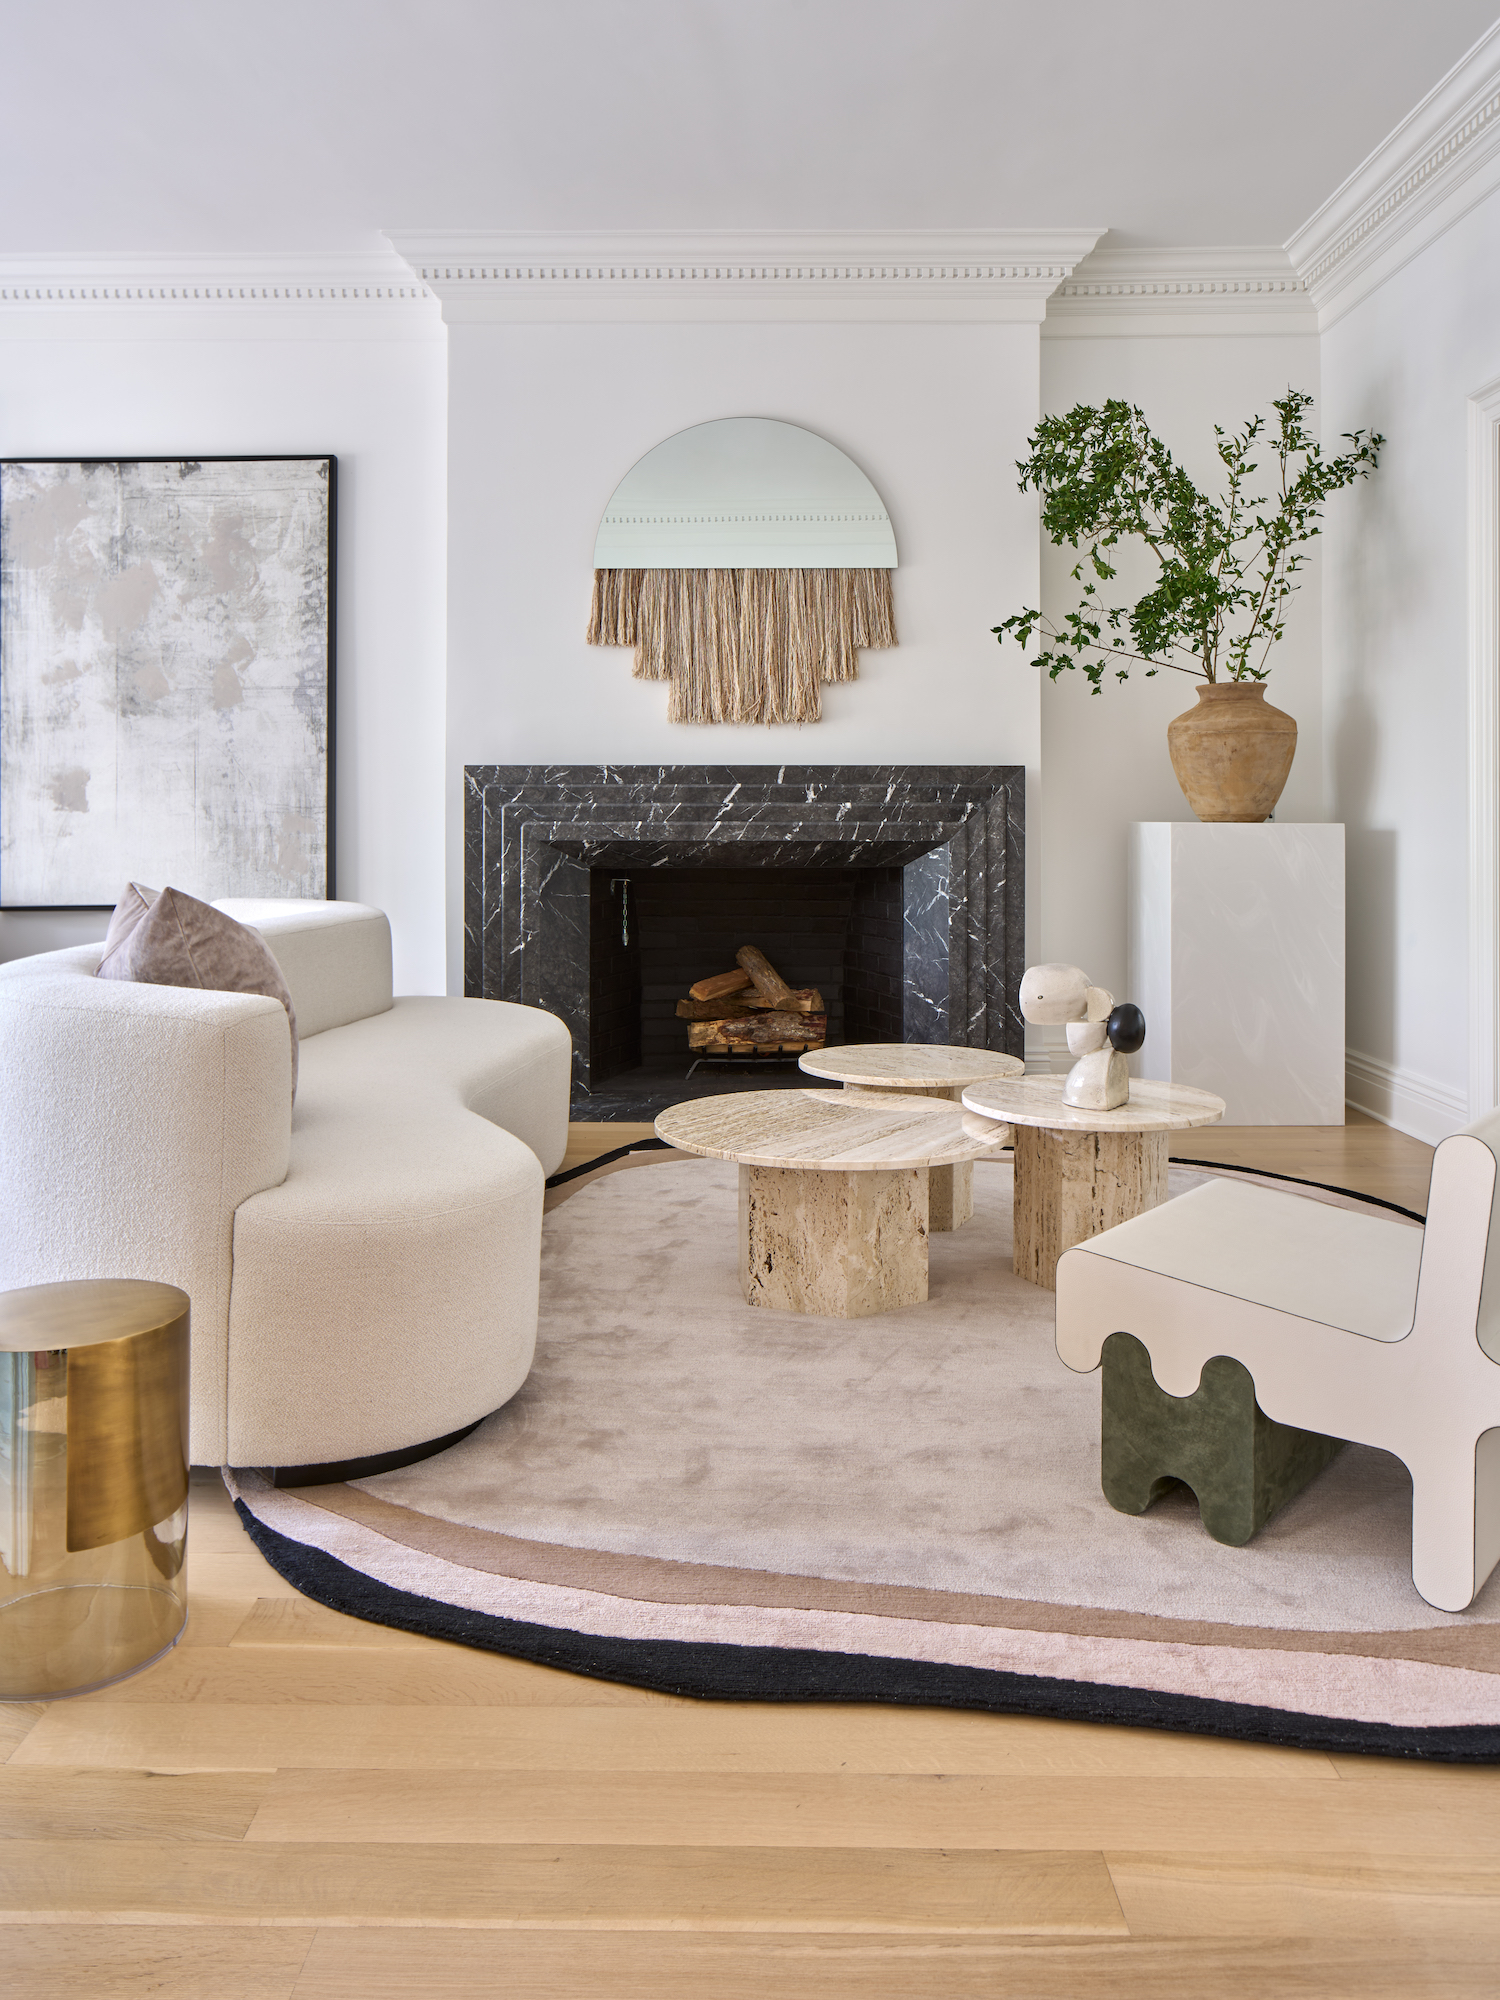 Living room of a Westchester house in New York interior designed by Ali Budd in Effect Magazine